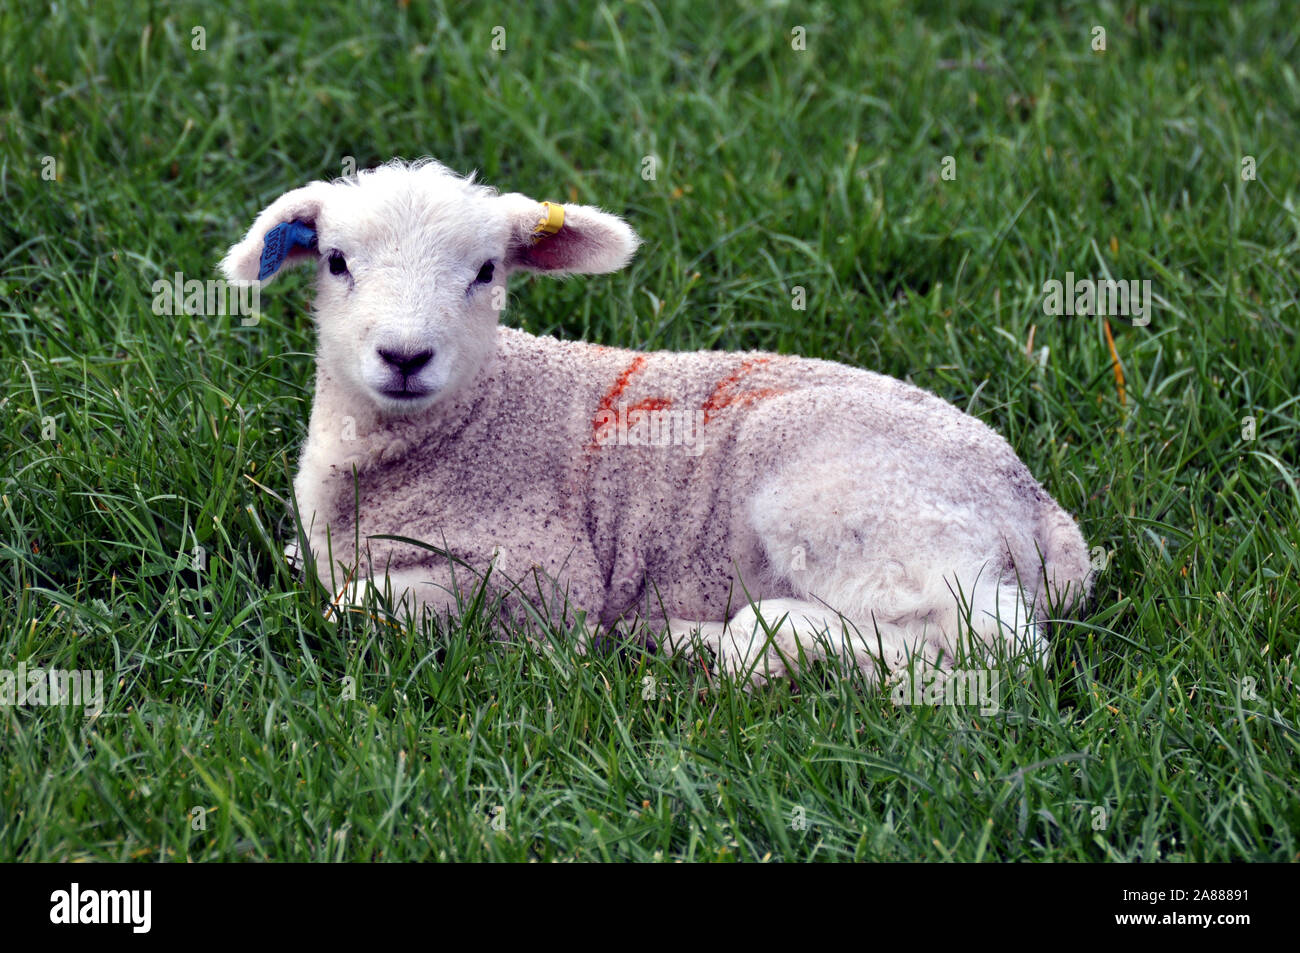 Cute baby lamb laying down looking at the photographer! Stock Photo